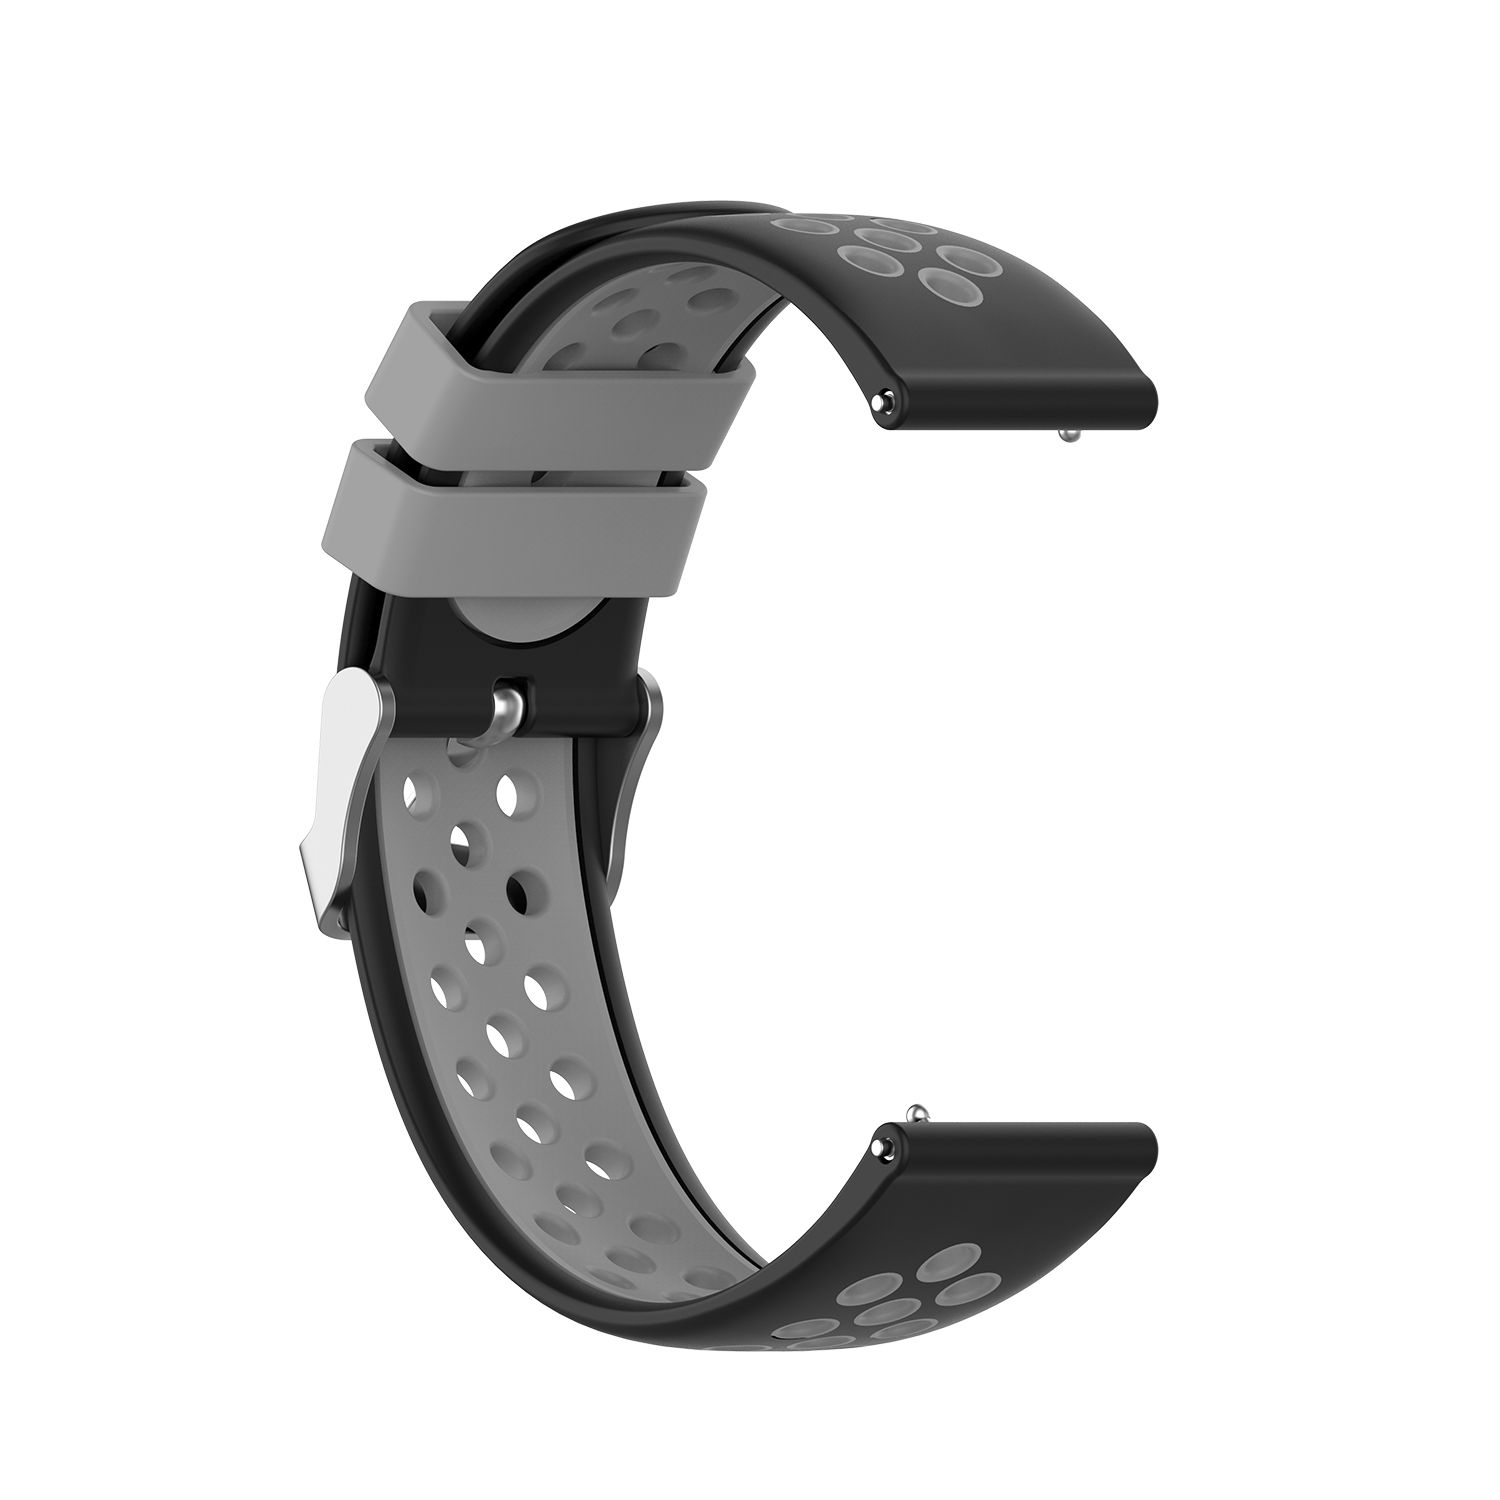 Bakeey-2022mm-Width-Universal-Sports-Dot-Pattern-Soft-Silicone-Watch-Band-Strap-Replacement-for-Sams-1737704-17